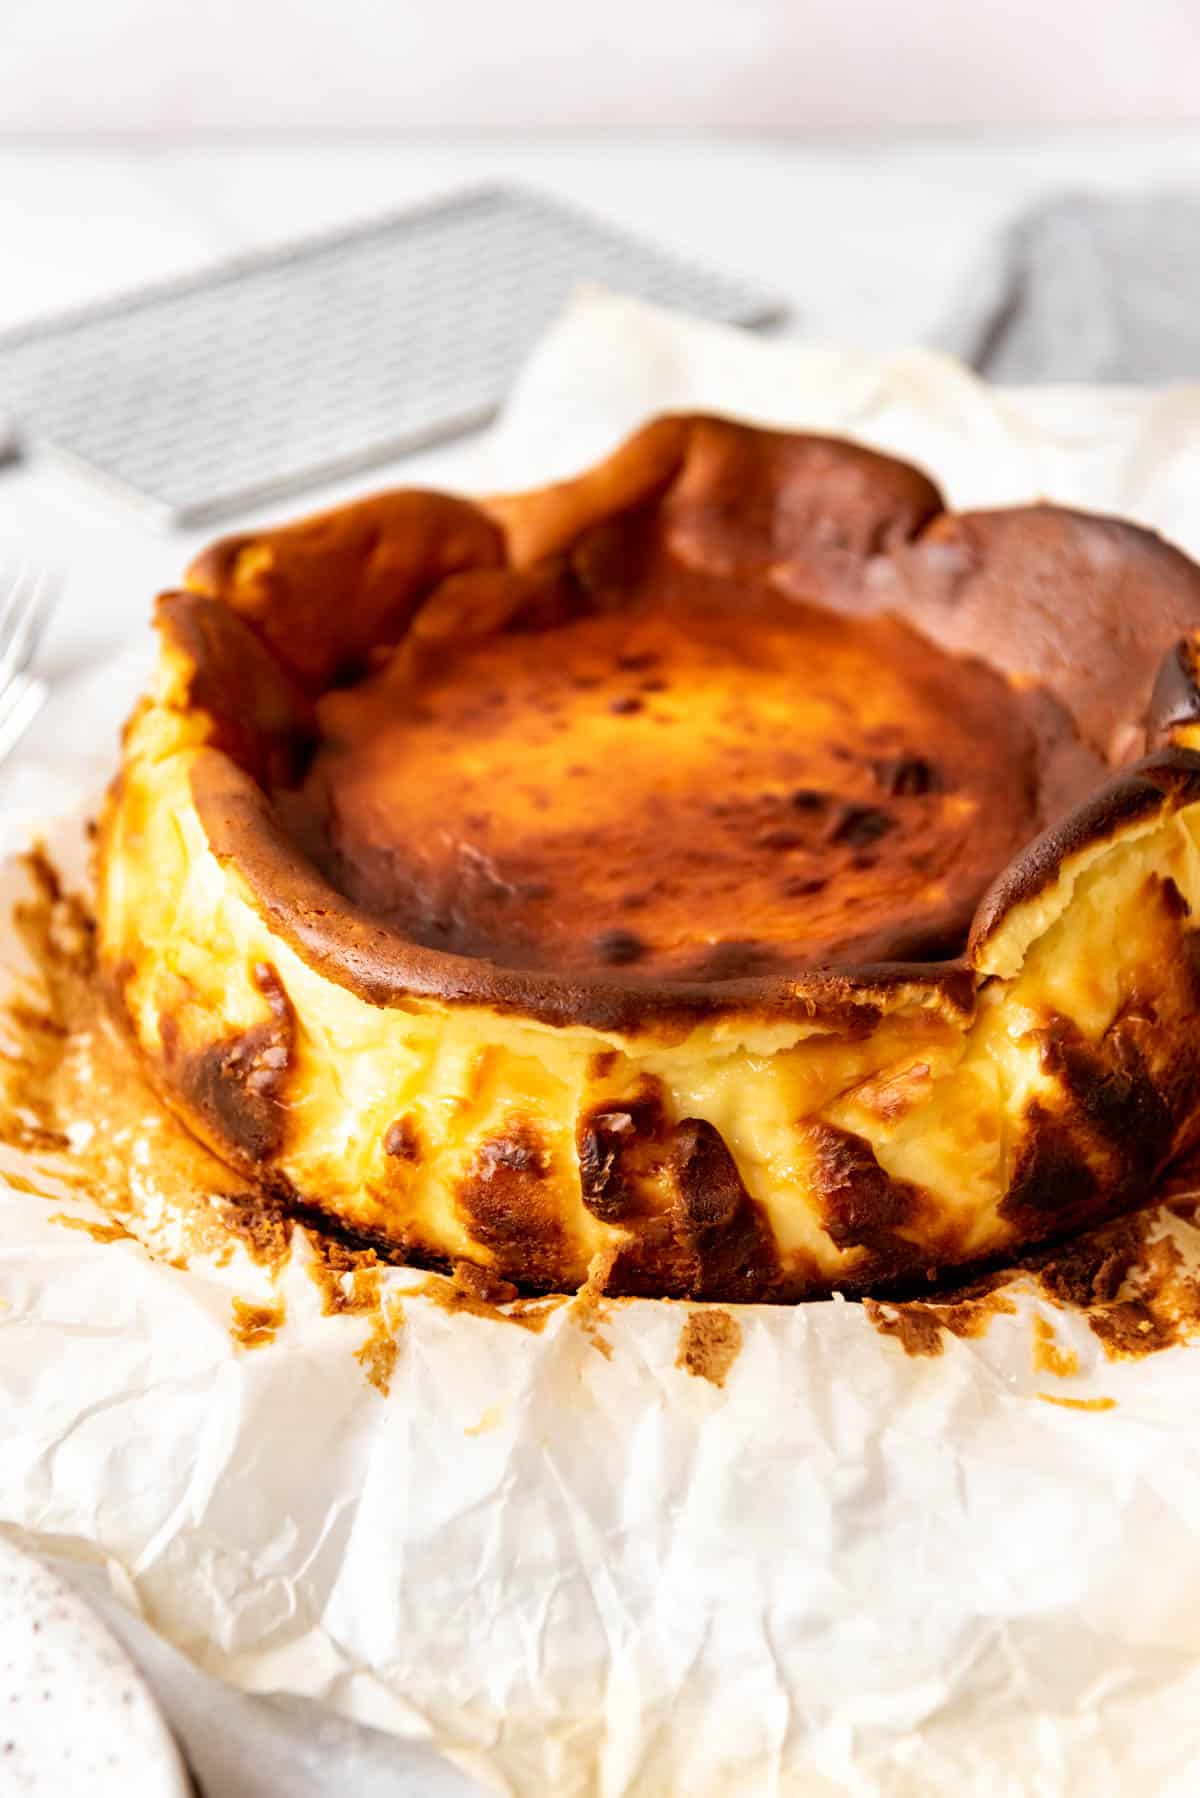 An unwrapped basque cheesecake.